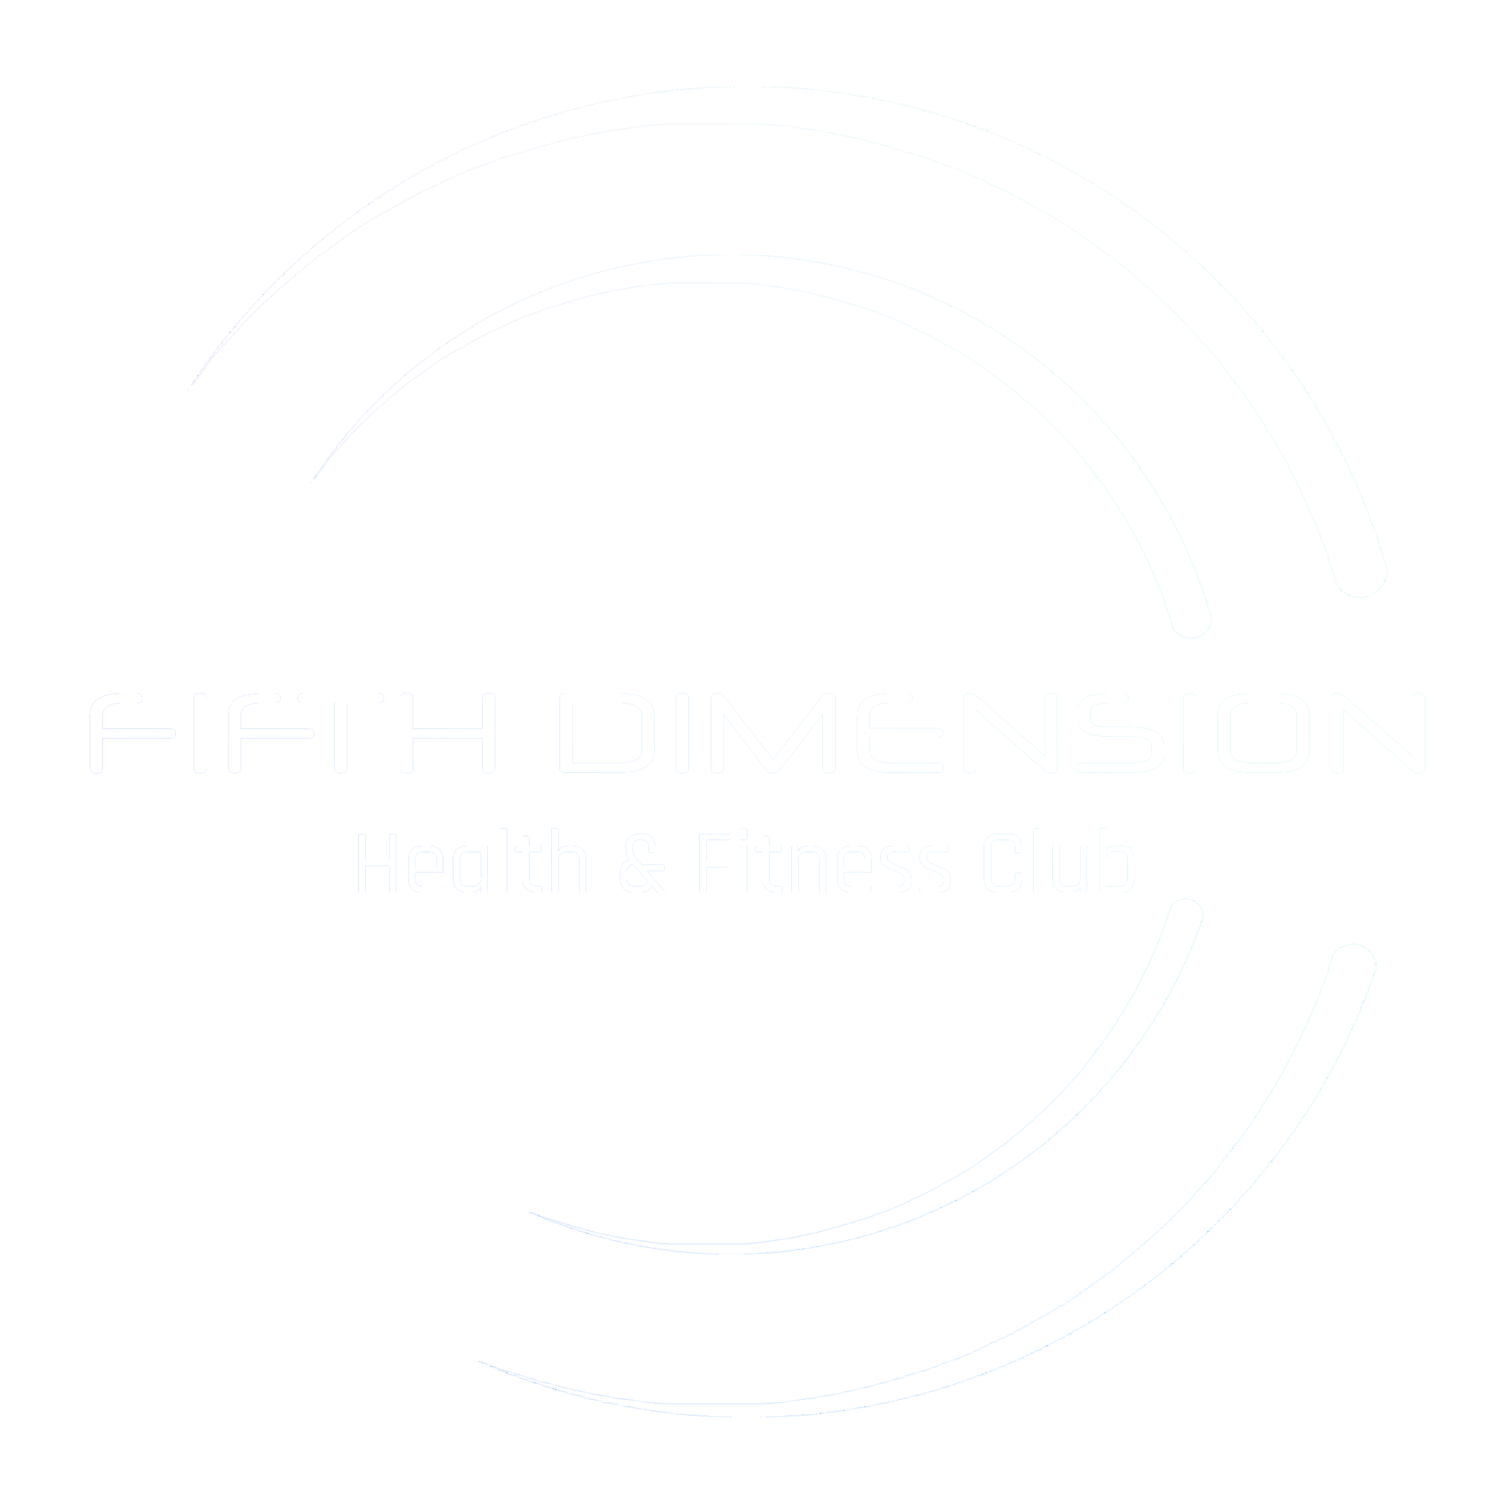 Fifth Dimension Health and Fitness Club